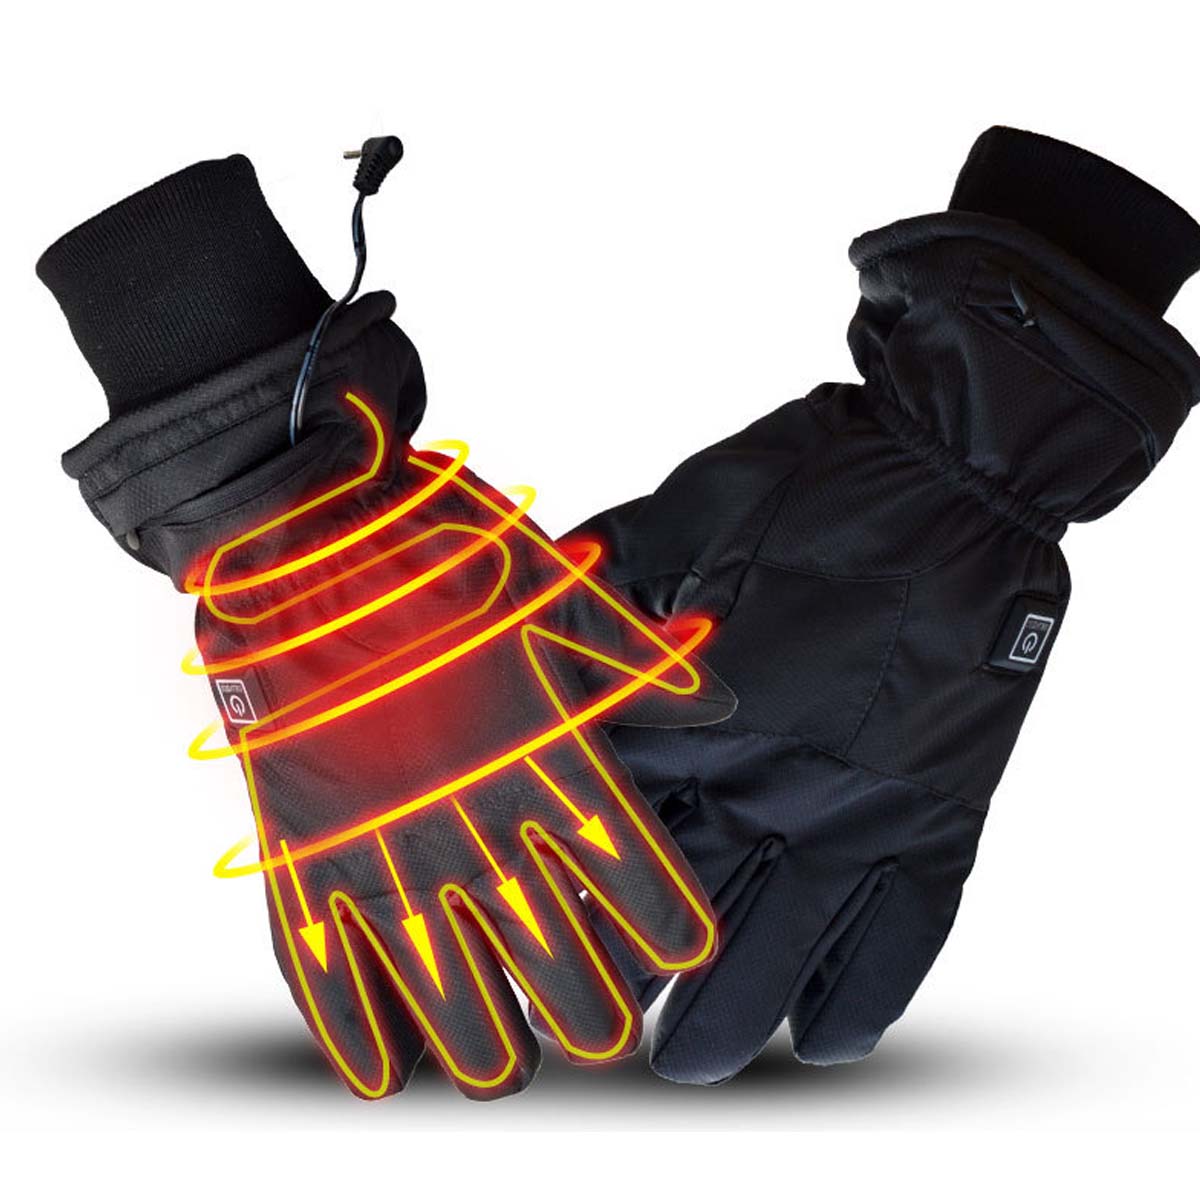 

WARMSPACE 7.4V 3000mah Electrically Heated Gloves Motorcycle Winter Warmer Outdoor Skiing